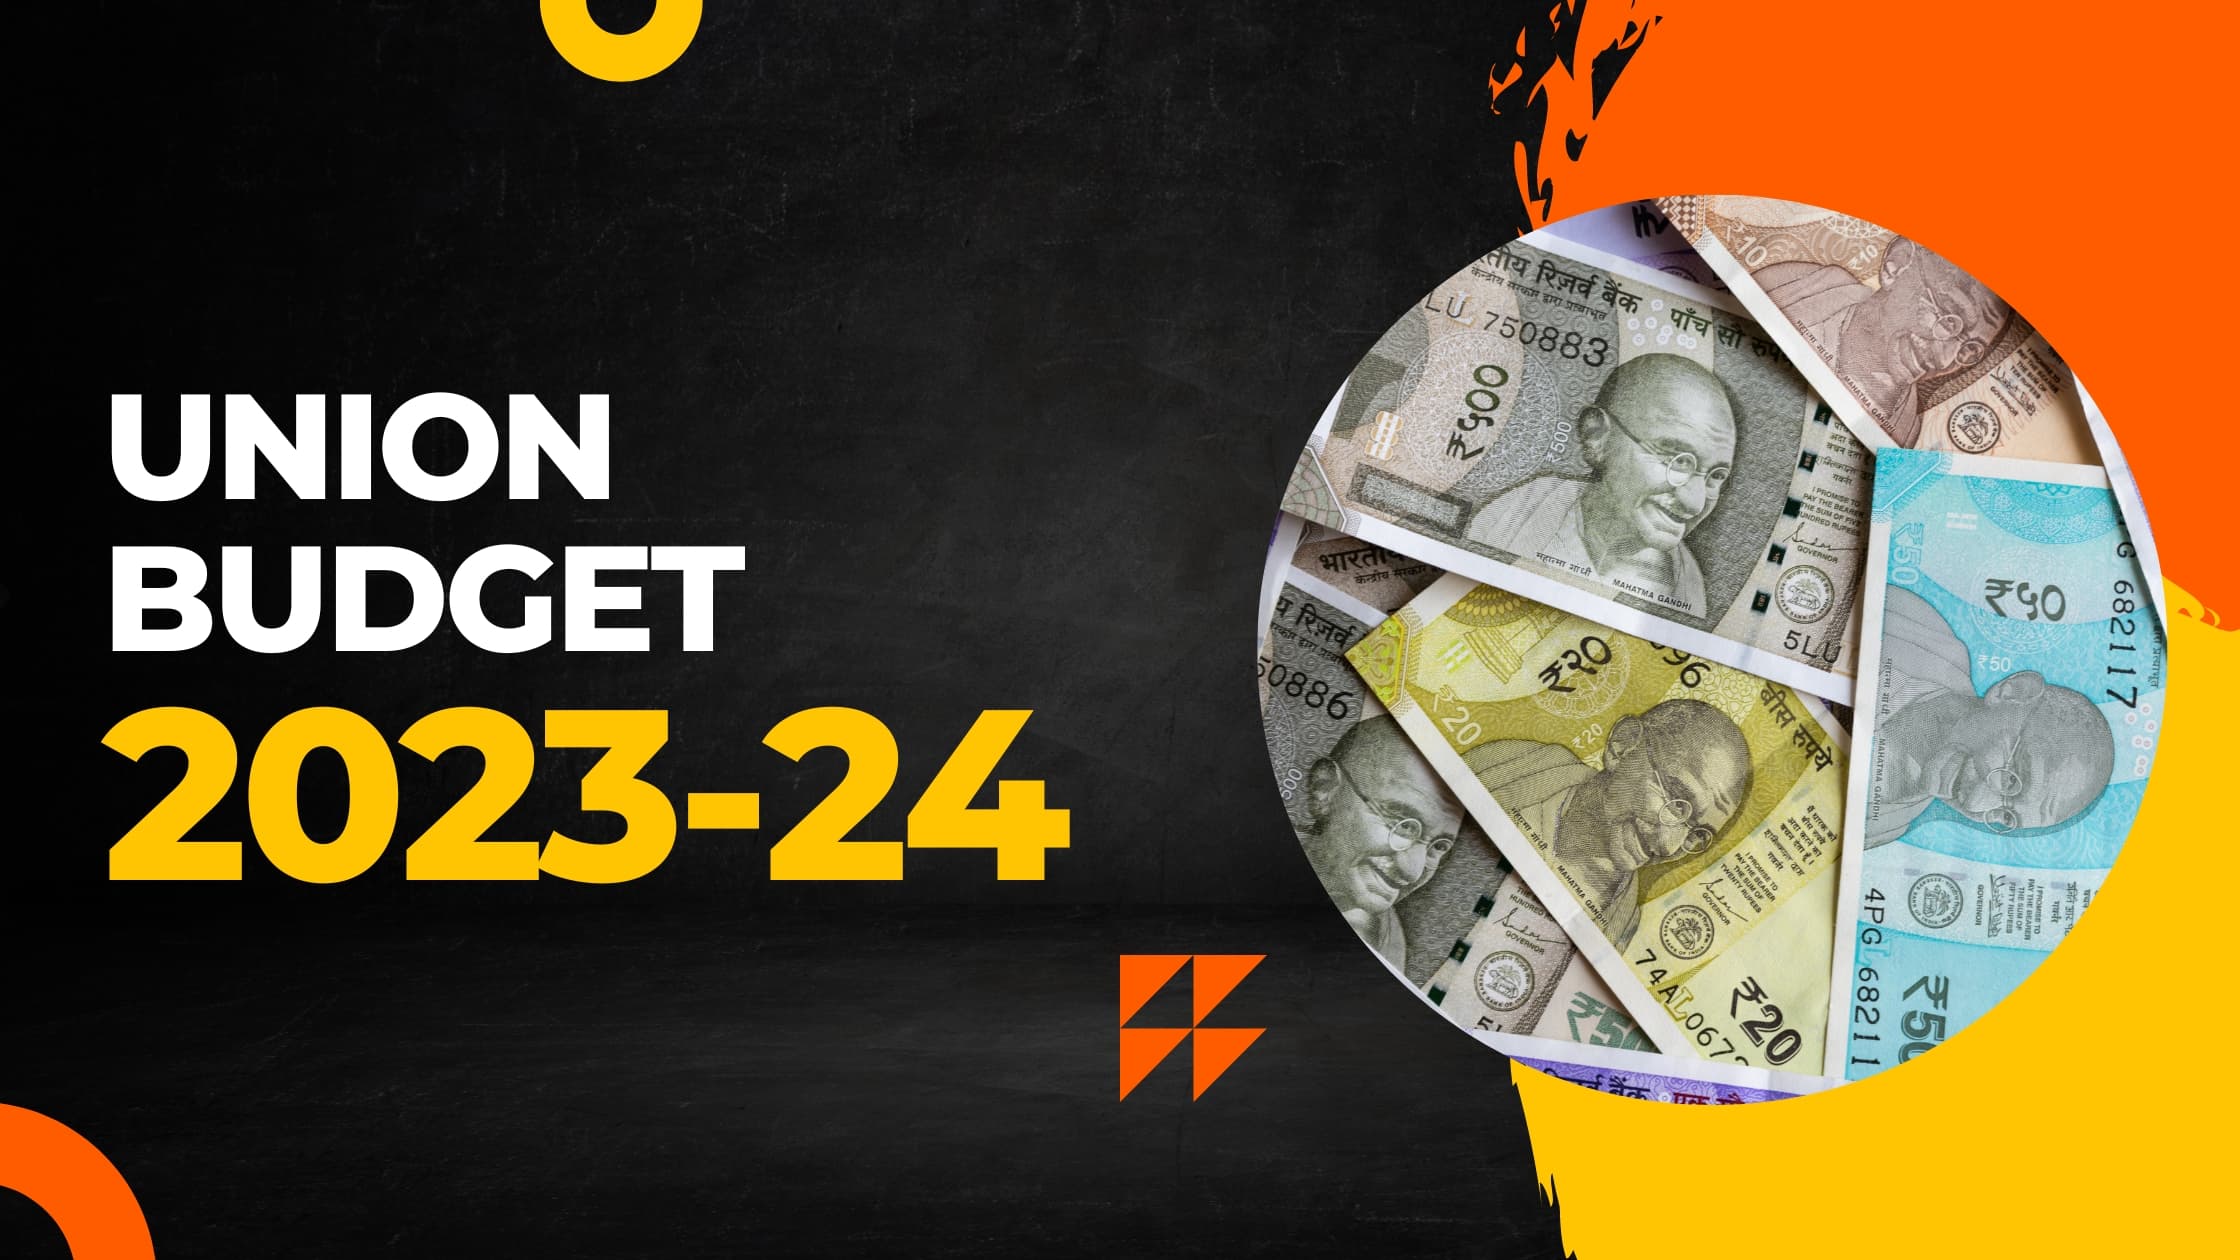 Union Budget 2023-24: Forging a Stronger, More Inclusive Nation!